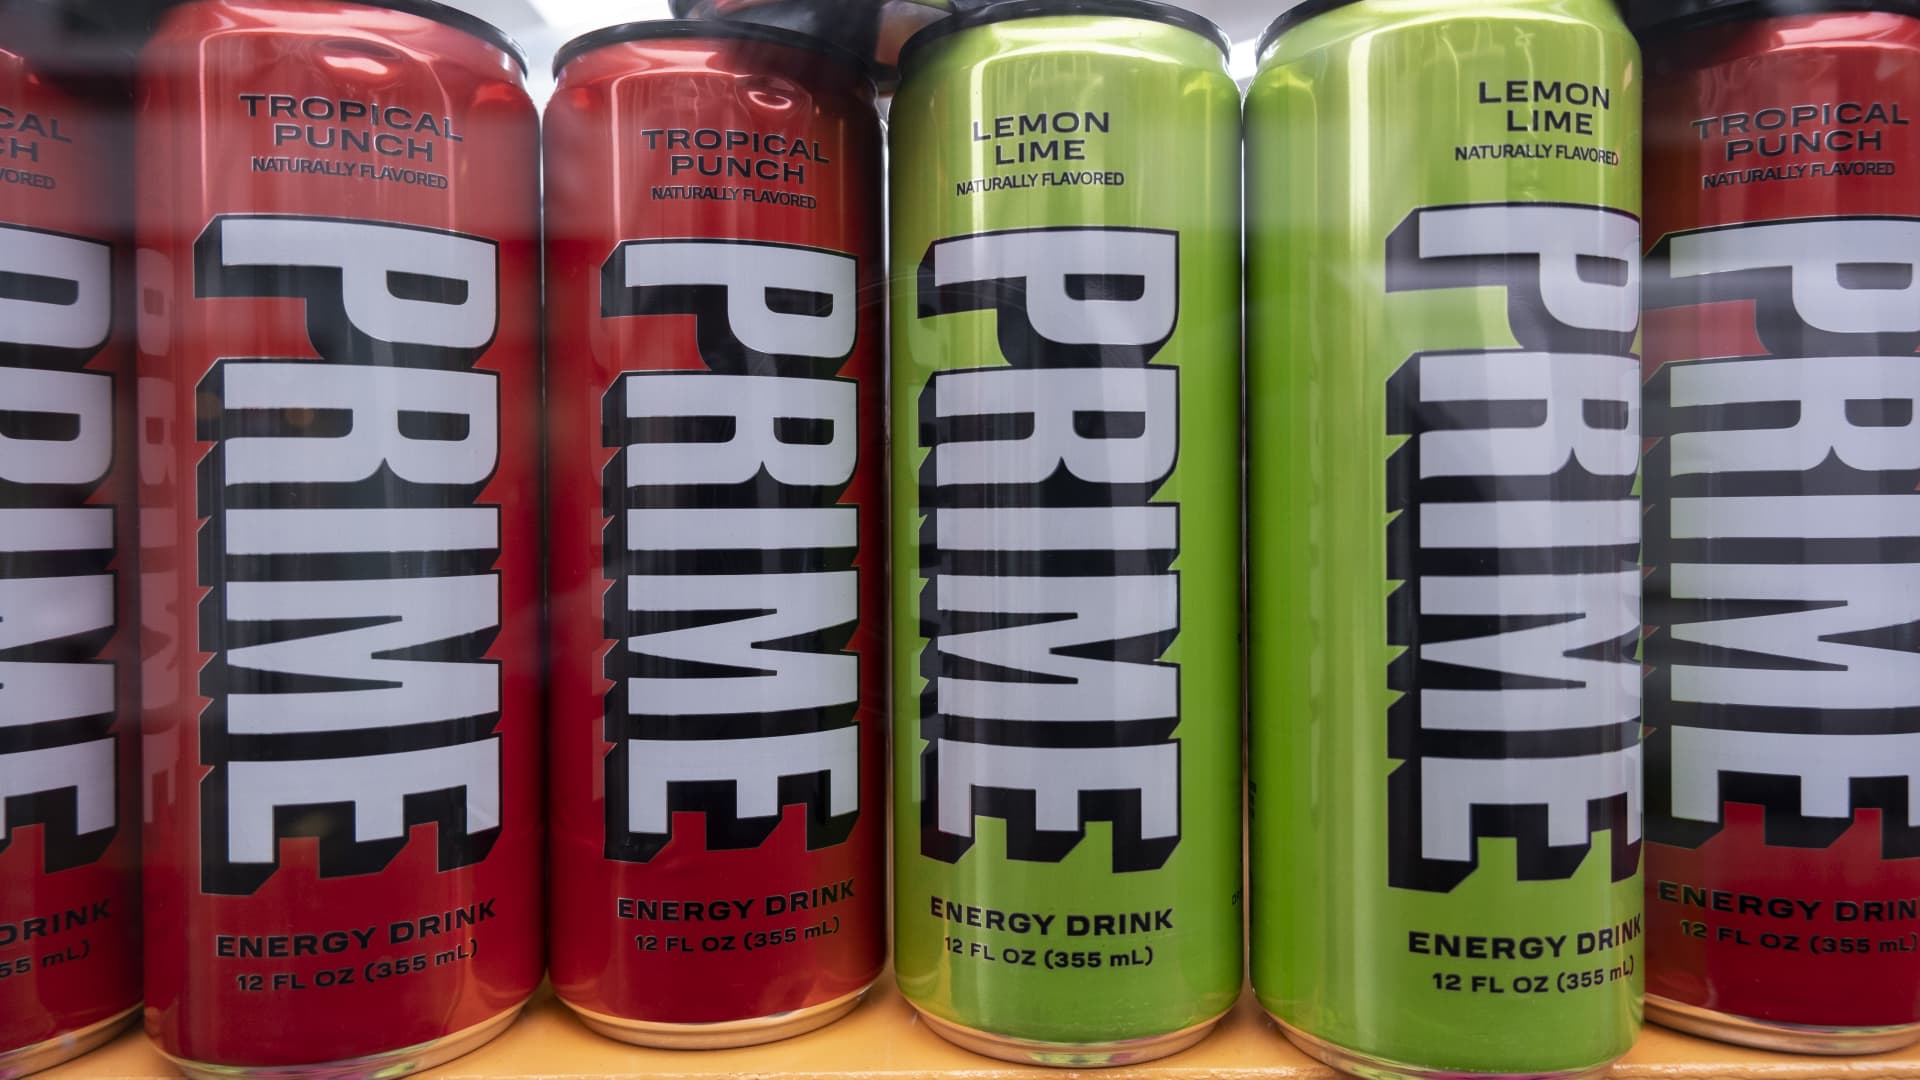 Popular Prime energy drink by Logan Paul that exceeds Canada’s caffeine limits to be recalled